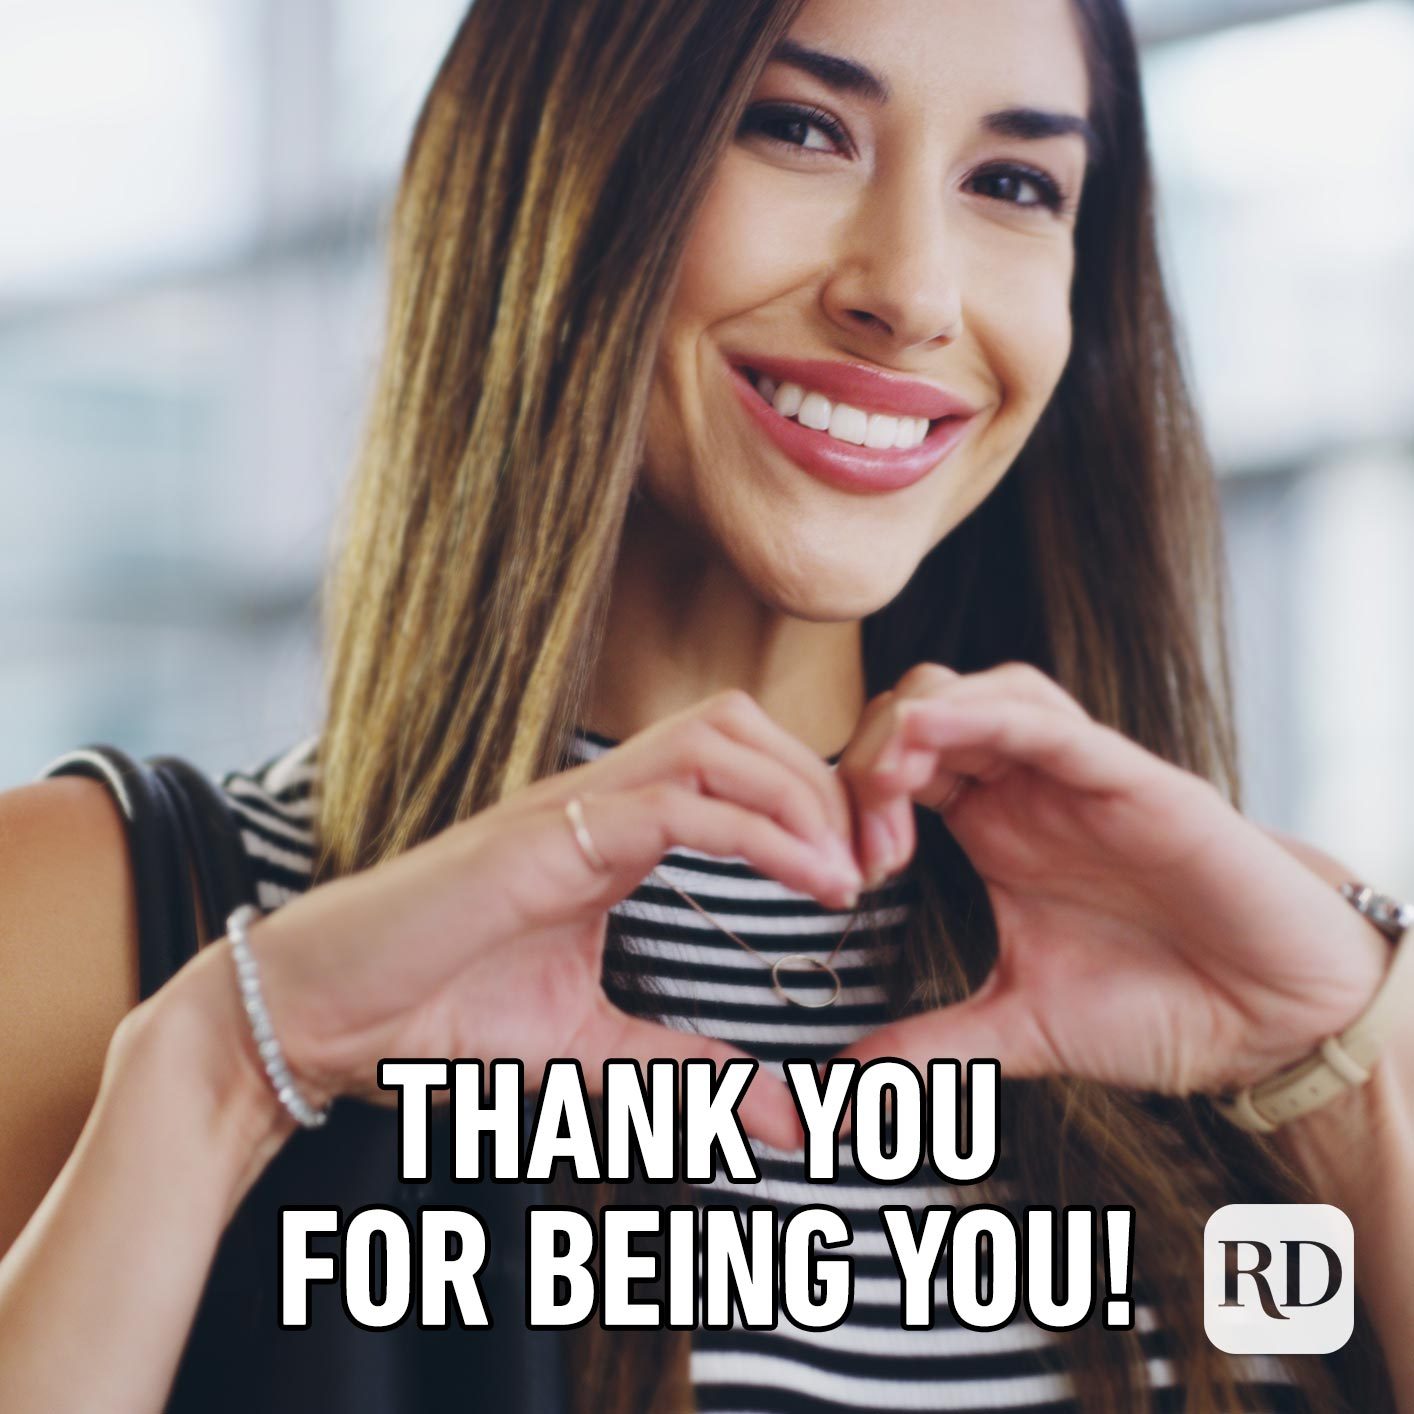 Woman holding hands in a heart shape. Meme text: Thank you for being you!